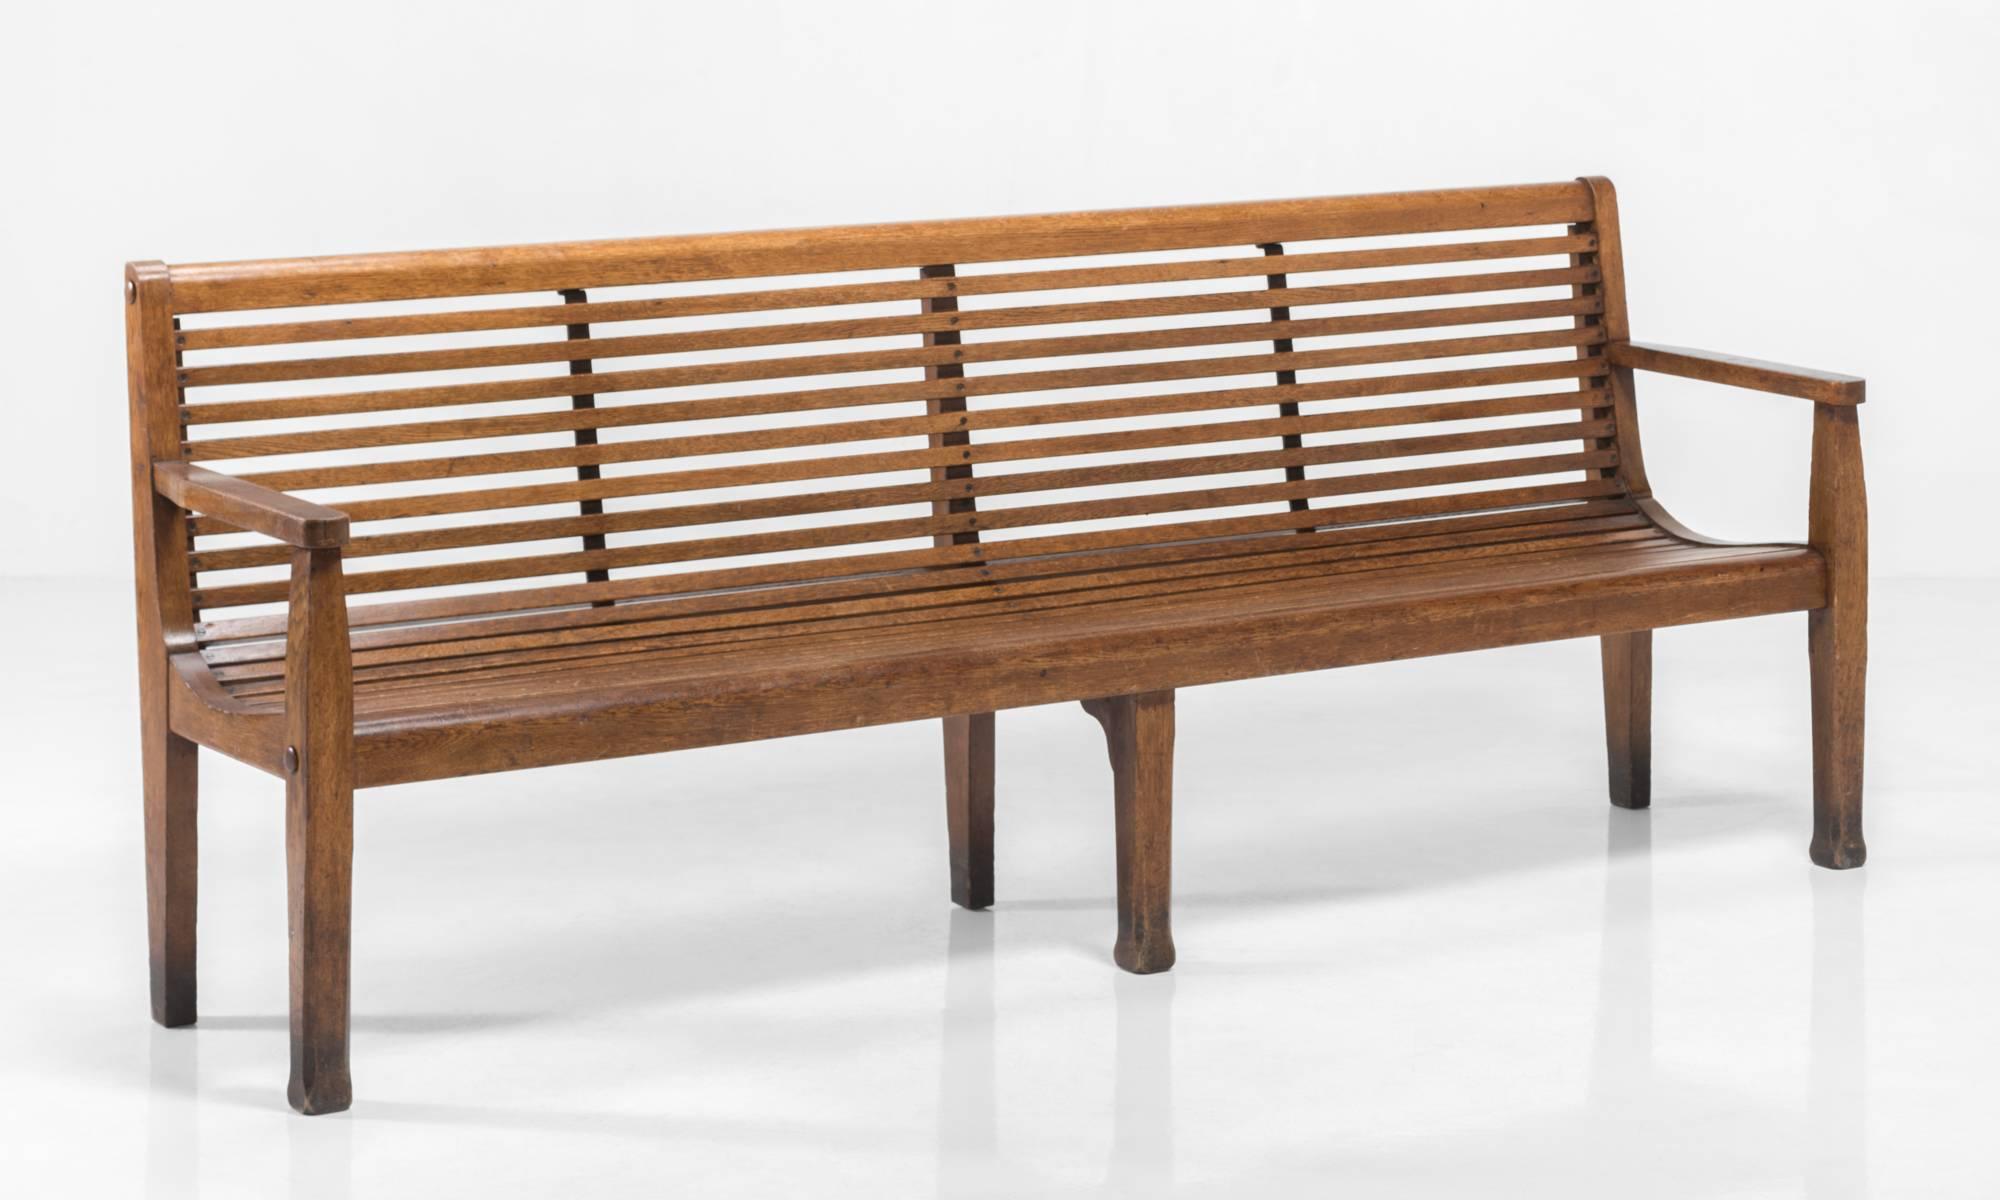 Oak Snooker Bench, England, circa 1890

Slatted oak benches with brass slot head screws, created by Riley's of Accrington.